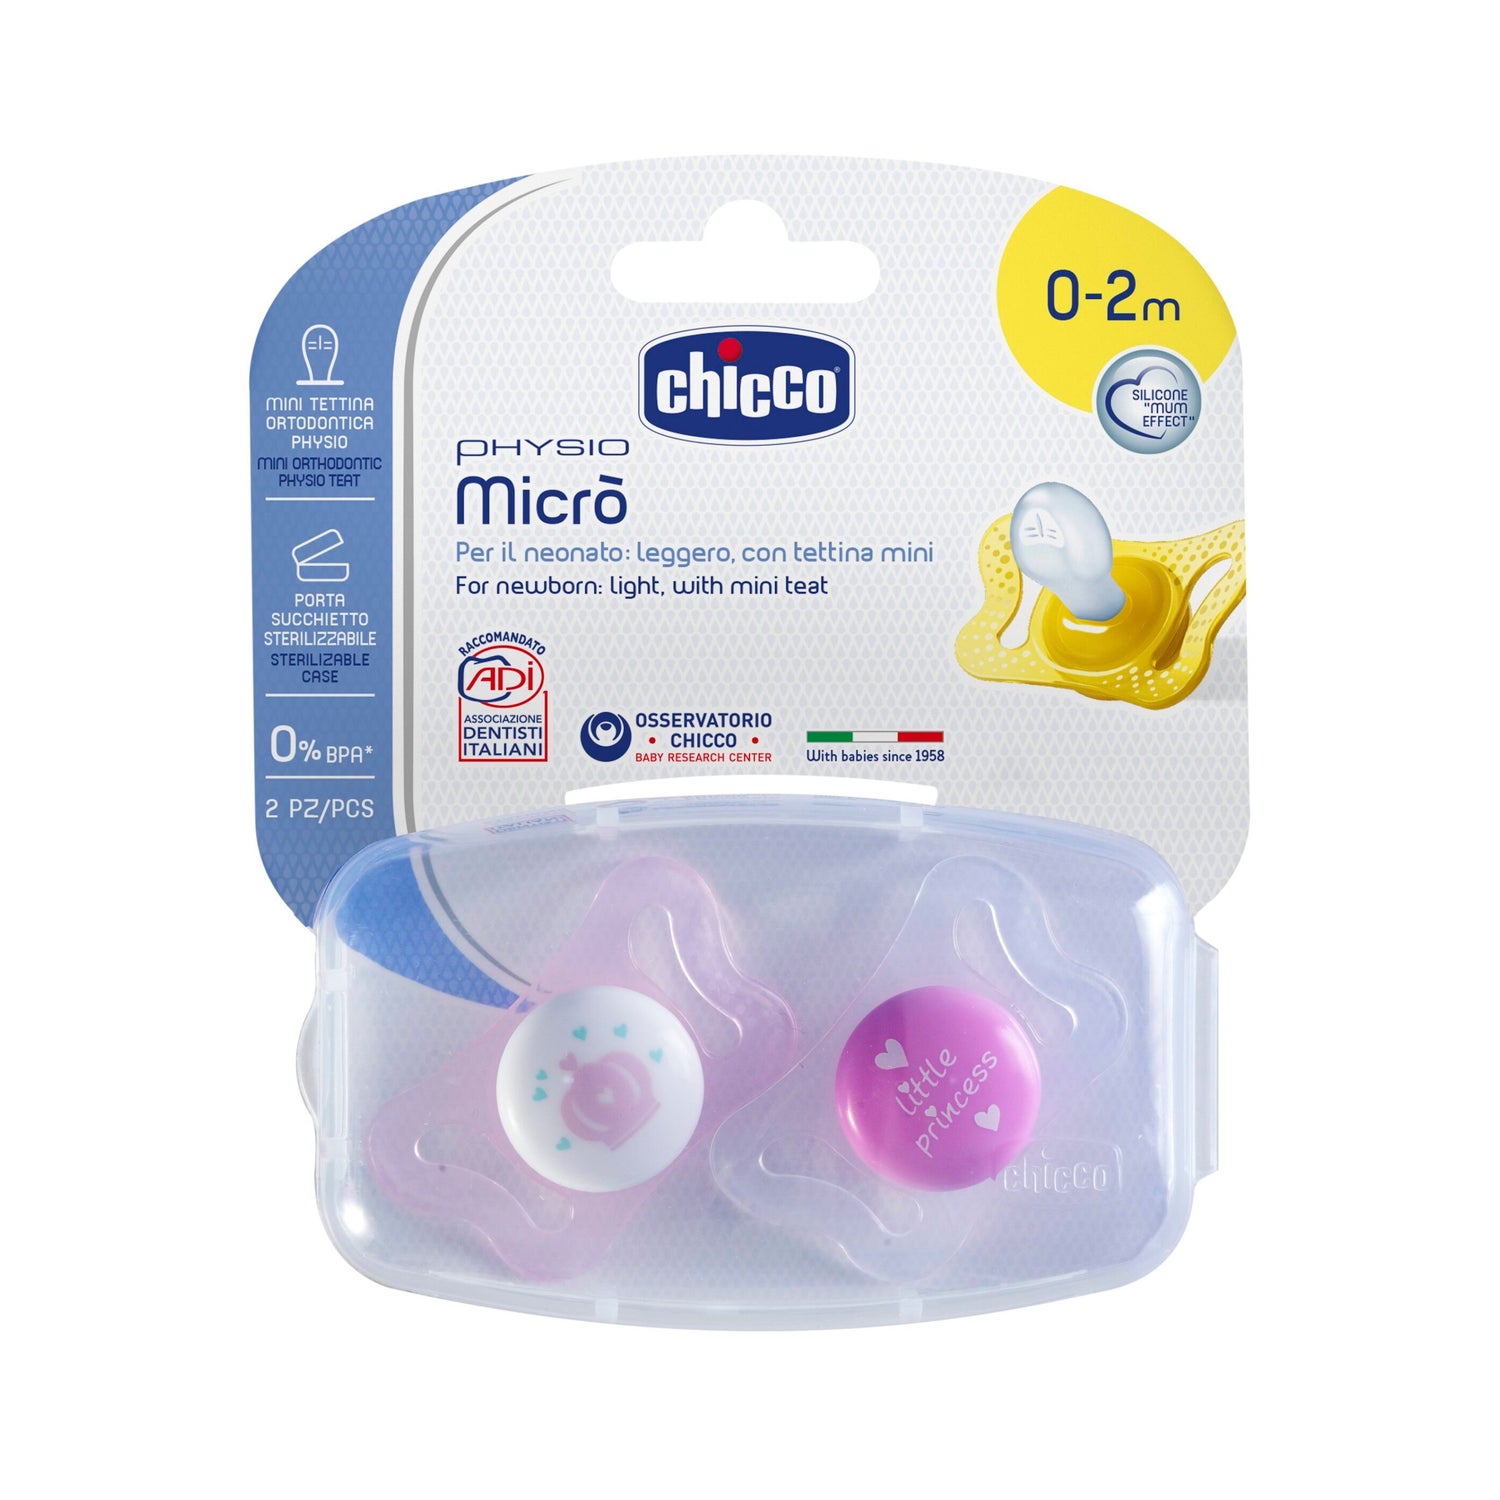 Sucette Chicco Silicone Physio Physio Micro 0-2 M Rose Rose 2